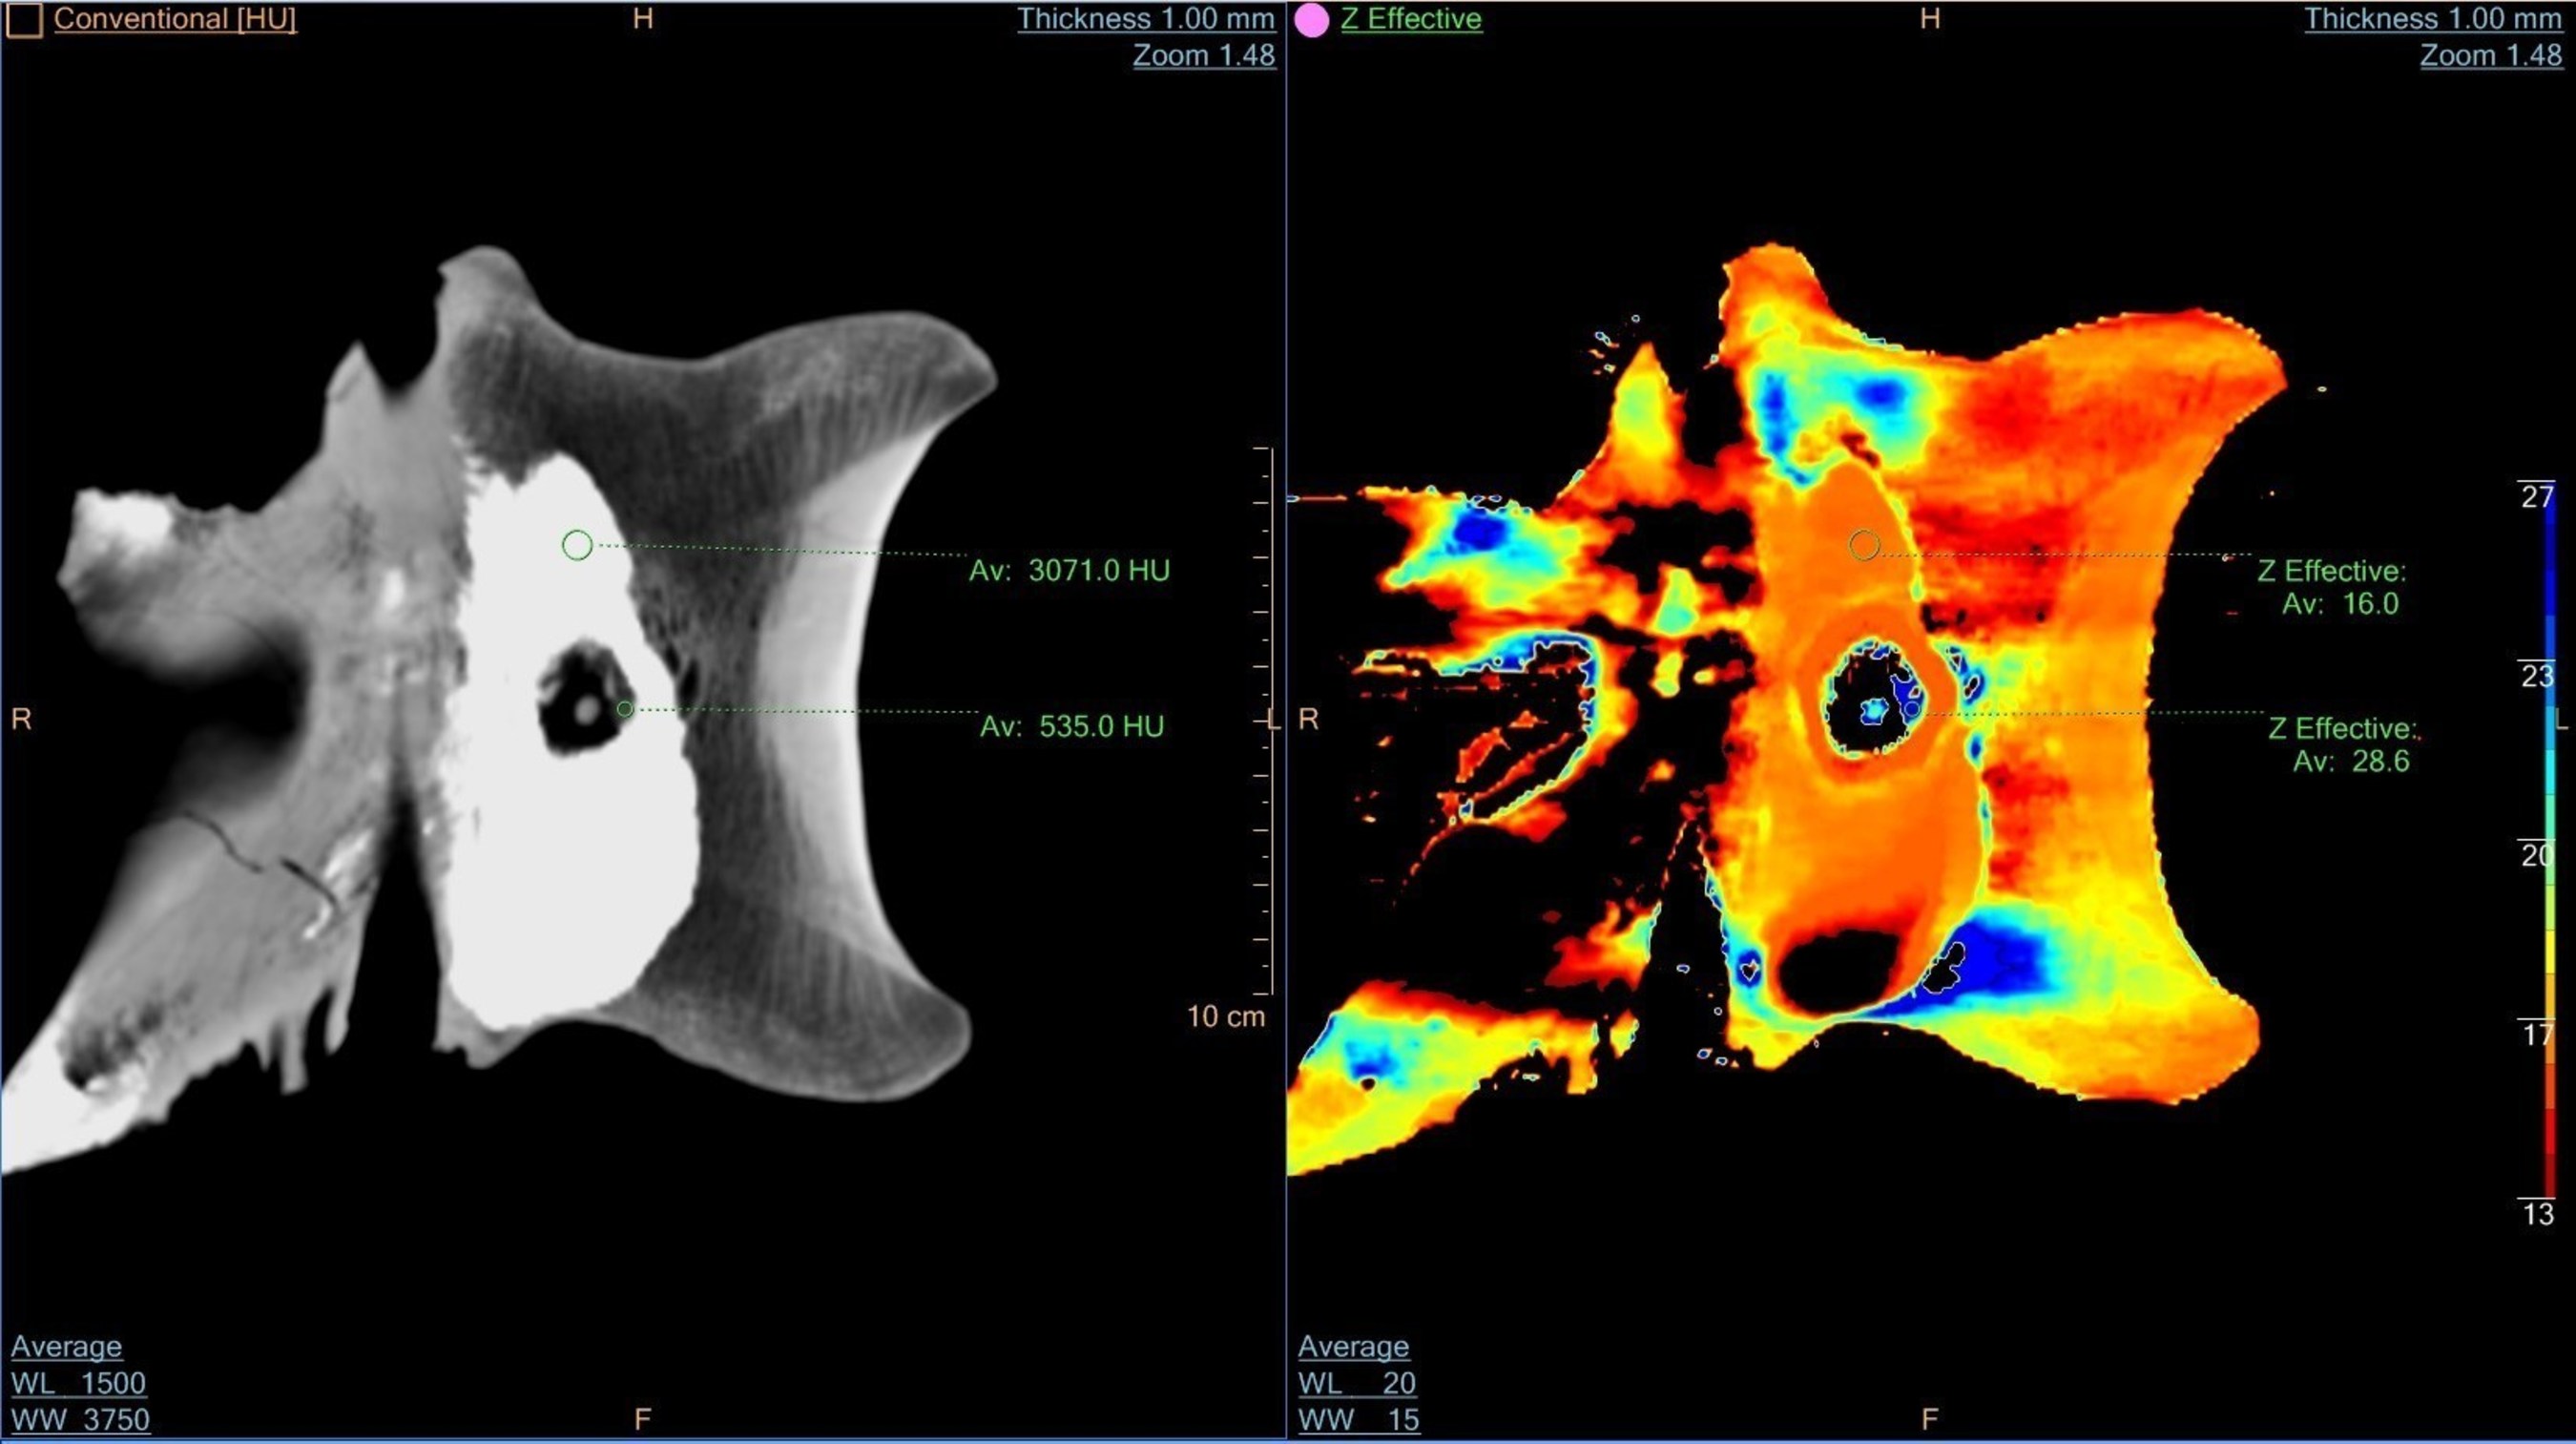 Trix tail shows color - Philips IQon was able to acquire two different X-ray energy levels in a single acquisition. Using IQon, Philips was able to identify and color-highlight bone structure, even with 'remineralized' versions of the original bones.